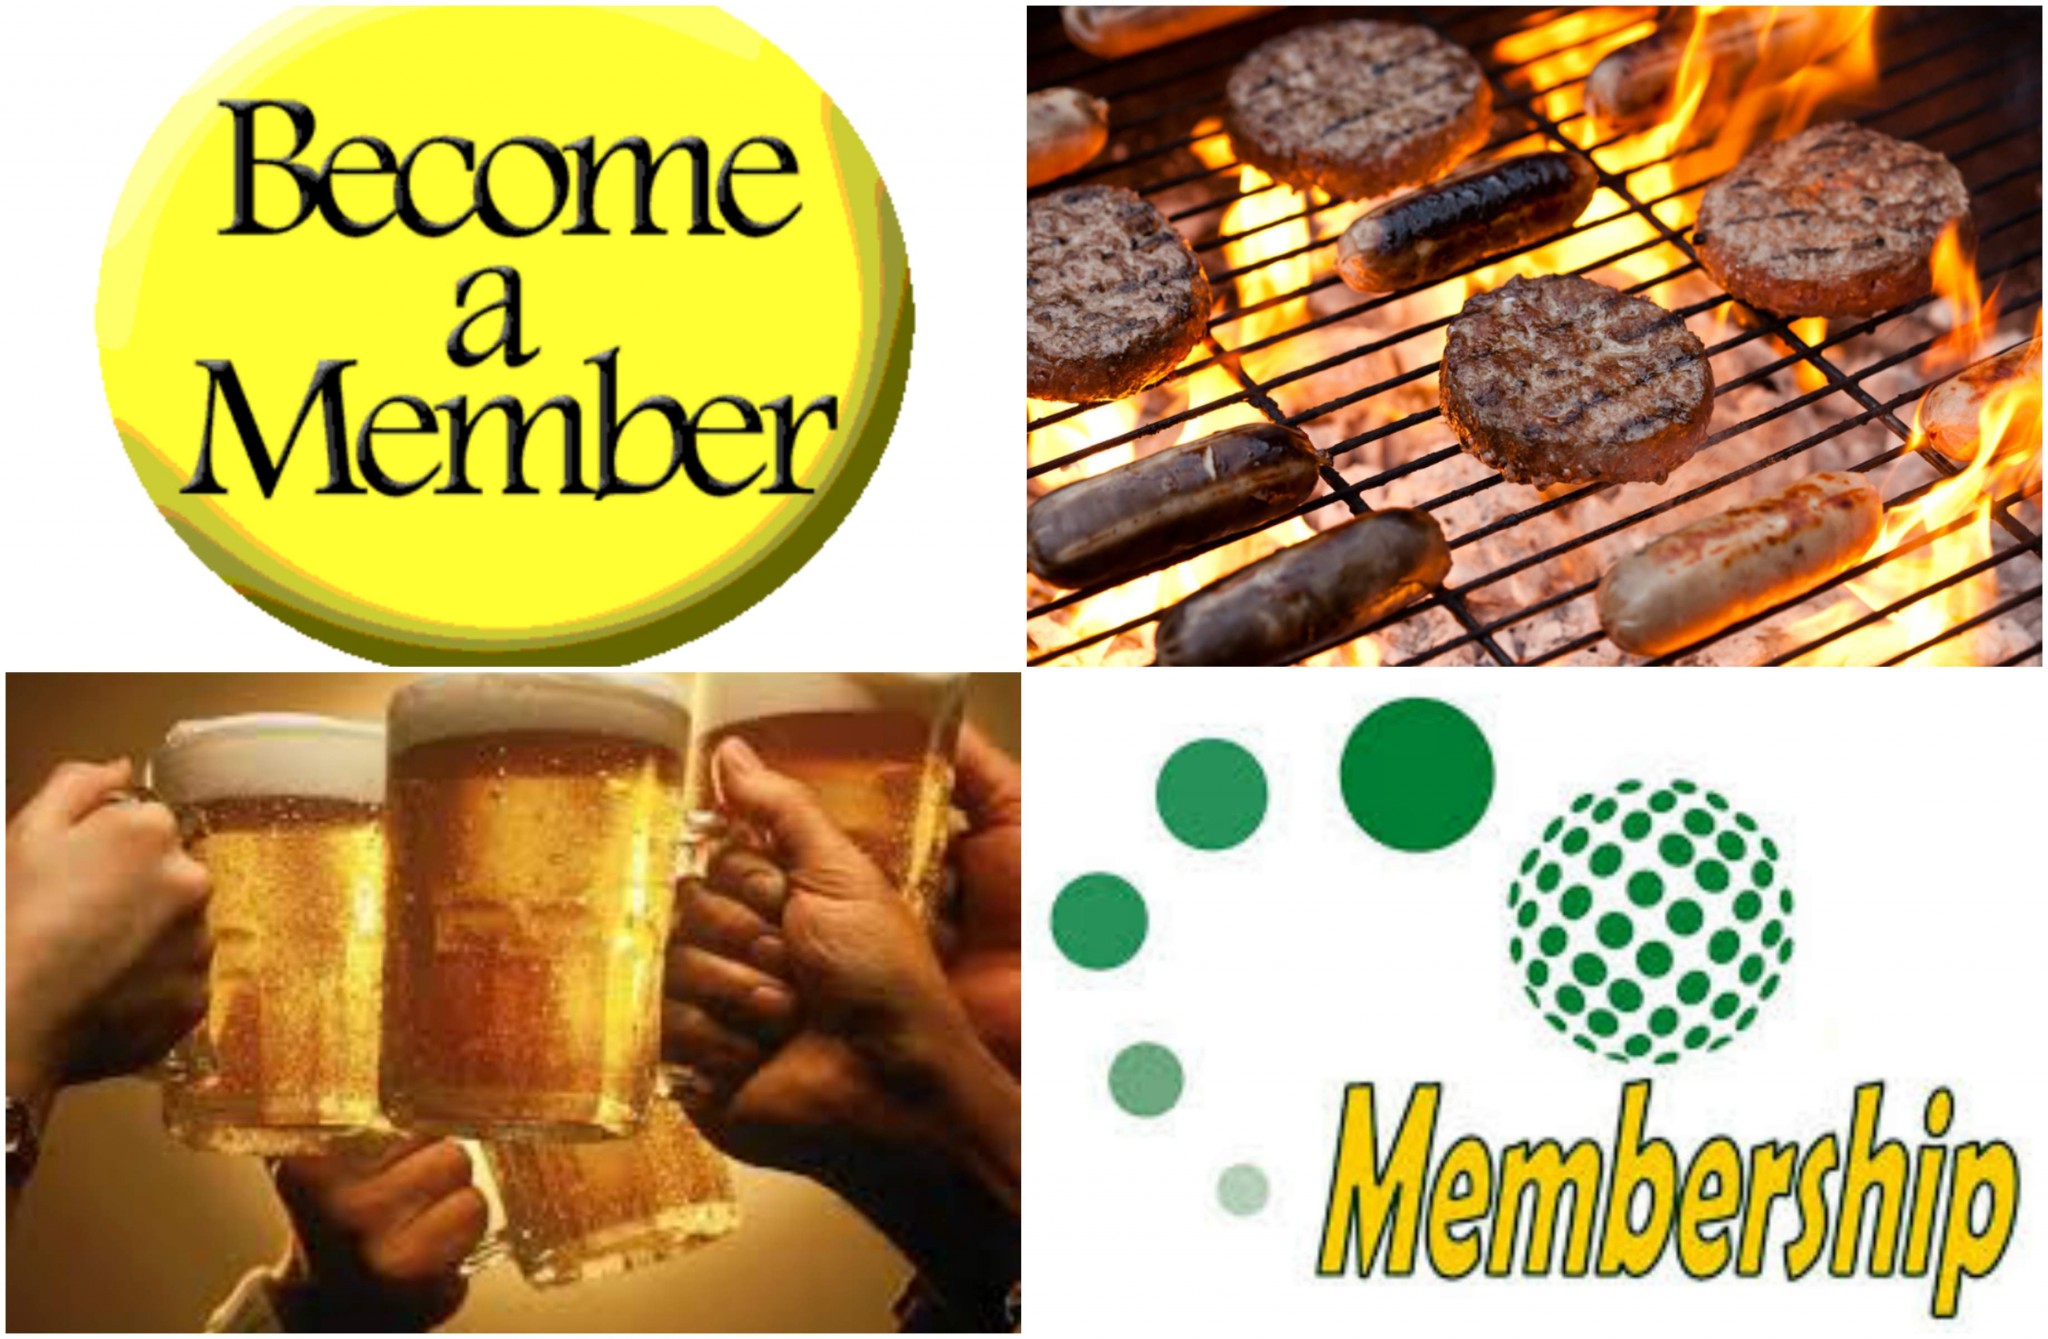 22nd August – Membership Day